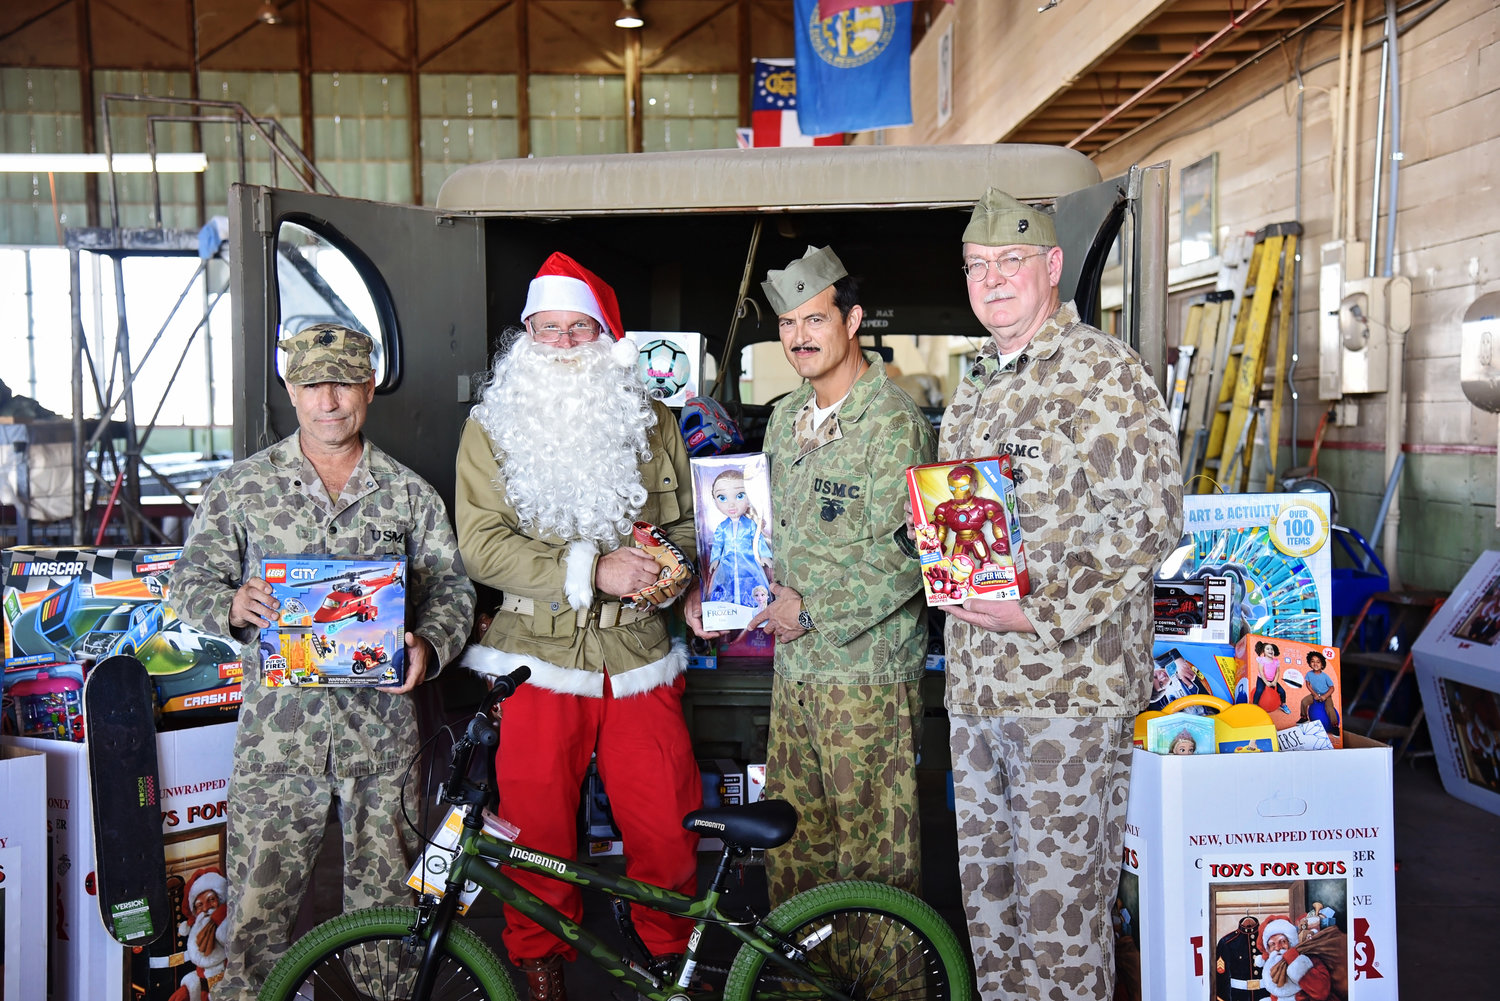 The Marines Toys for Tots program had a great turnout during Open Hangar Day, Oct. 30, 2021. The toys will be delivered as Christmas gifts to children in need.